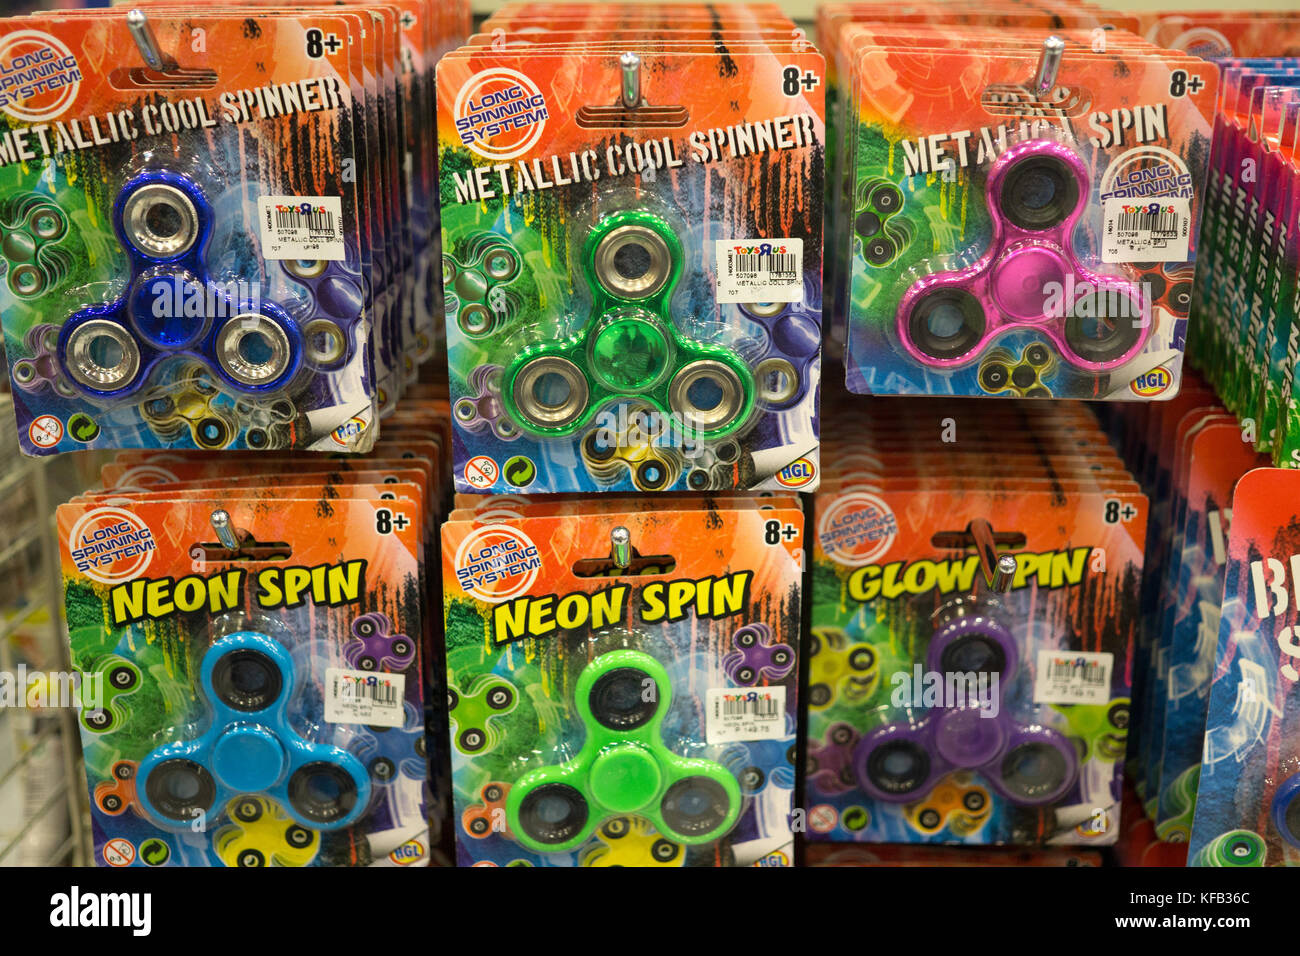 where can i buy a fidget spinner in store